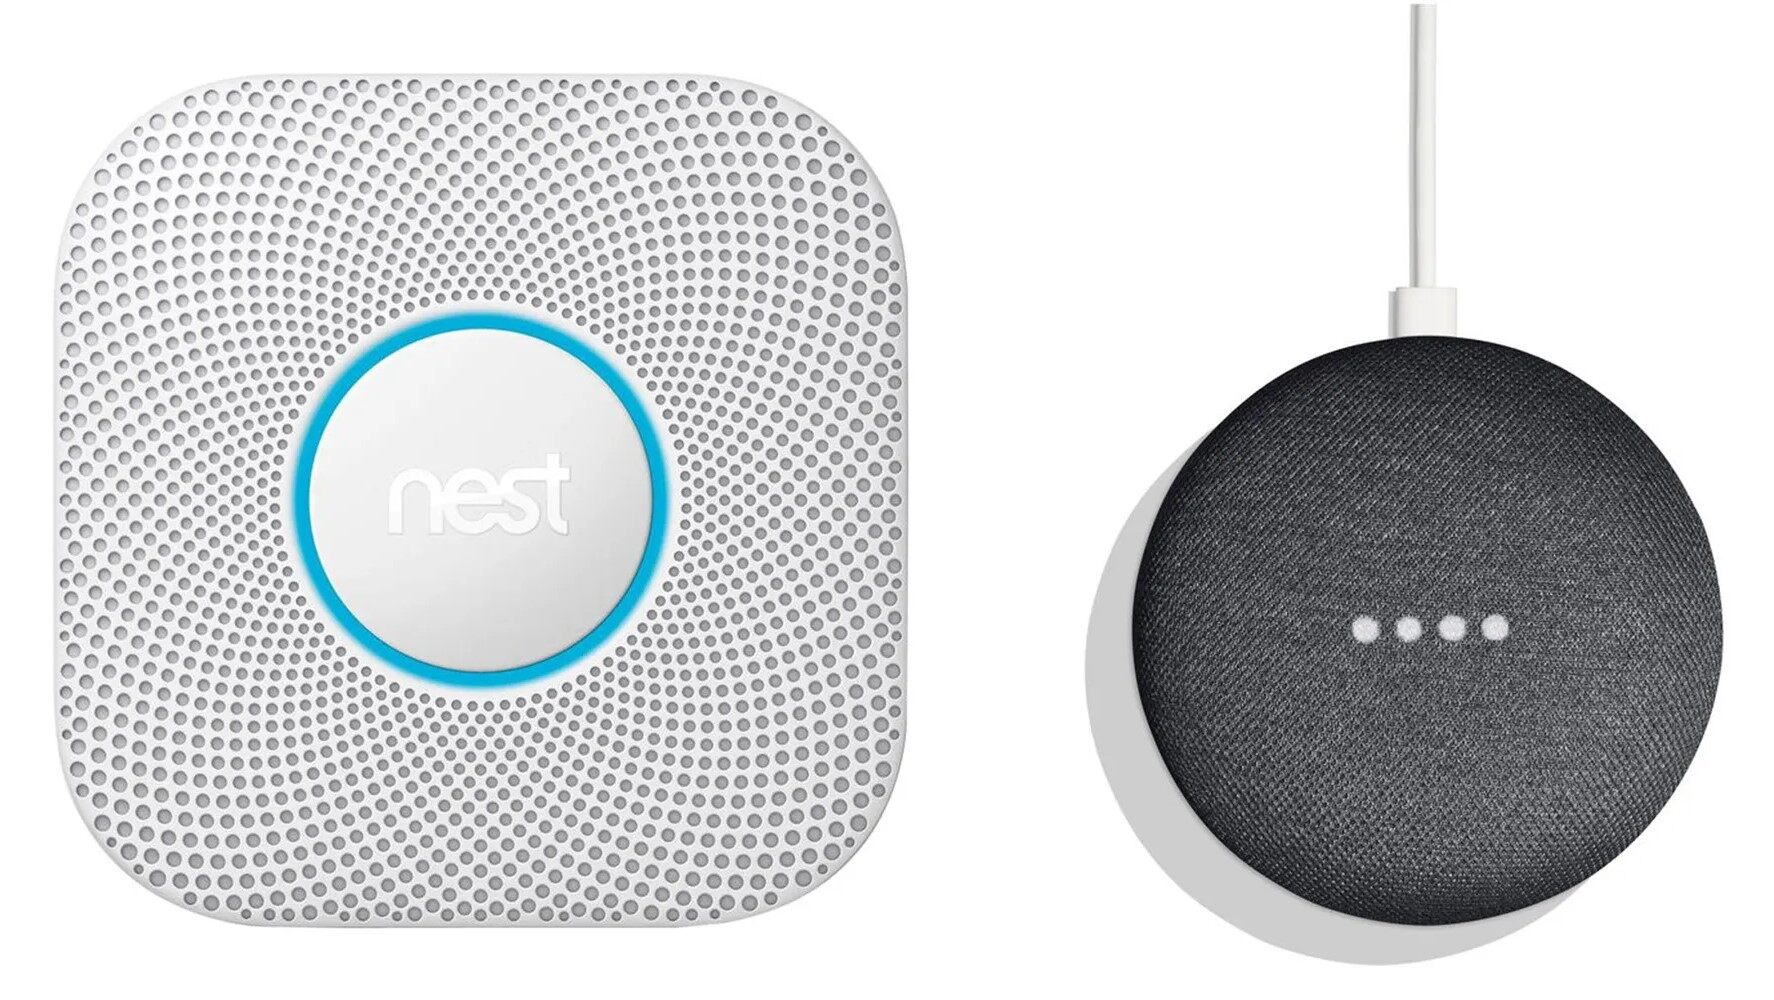 How To Add Nest Protect To Google Home